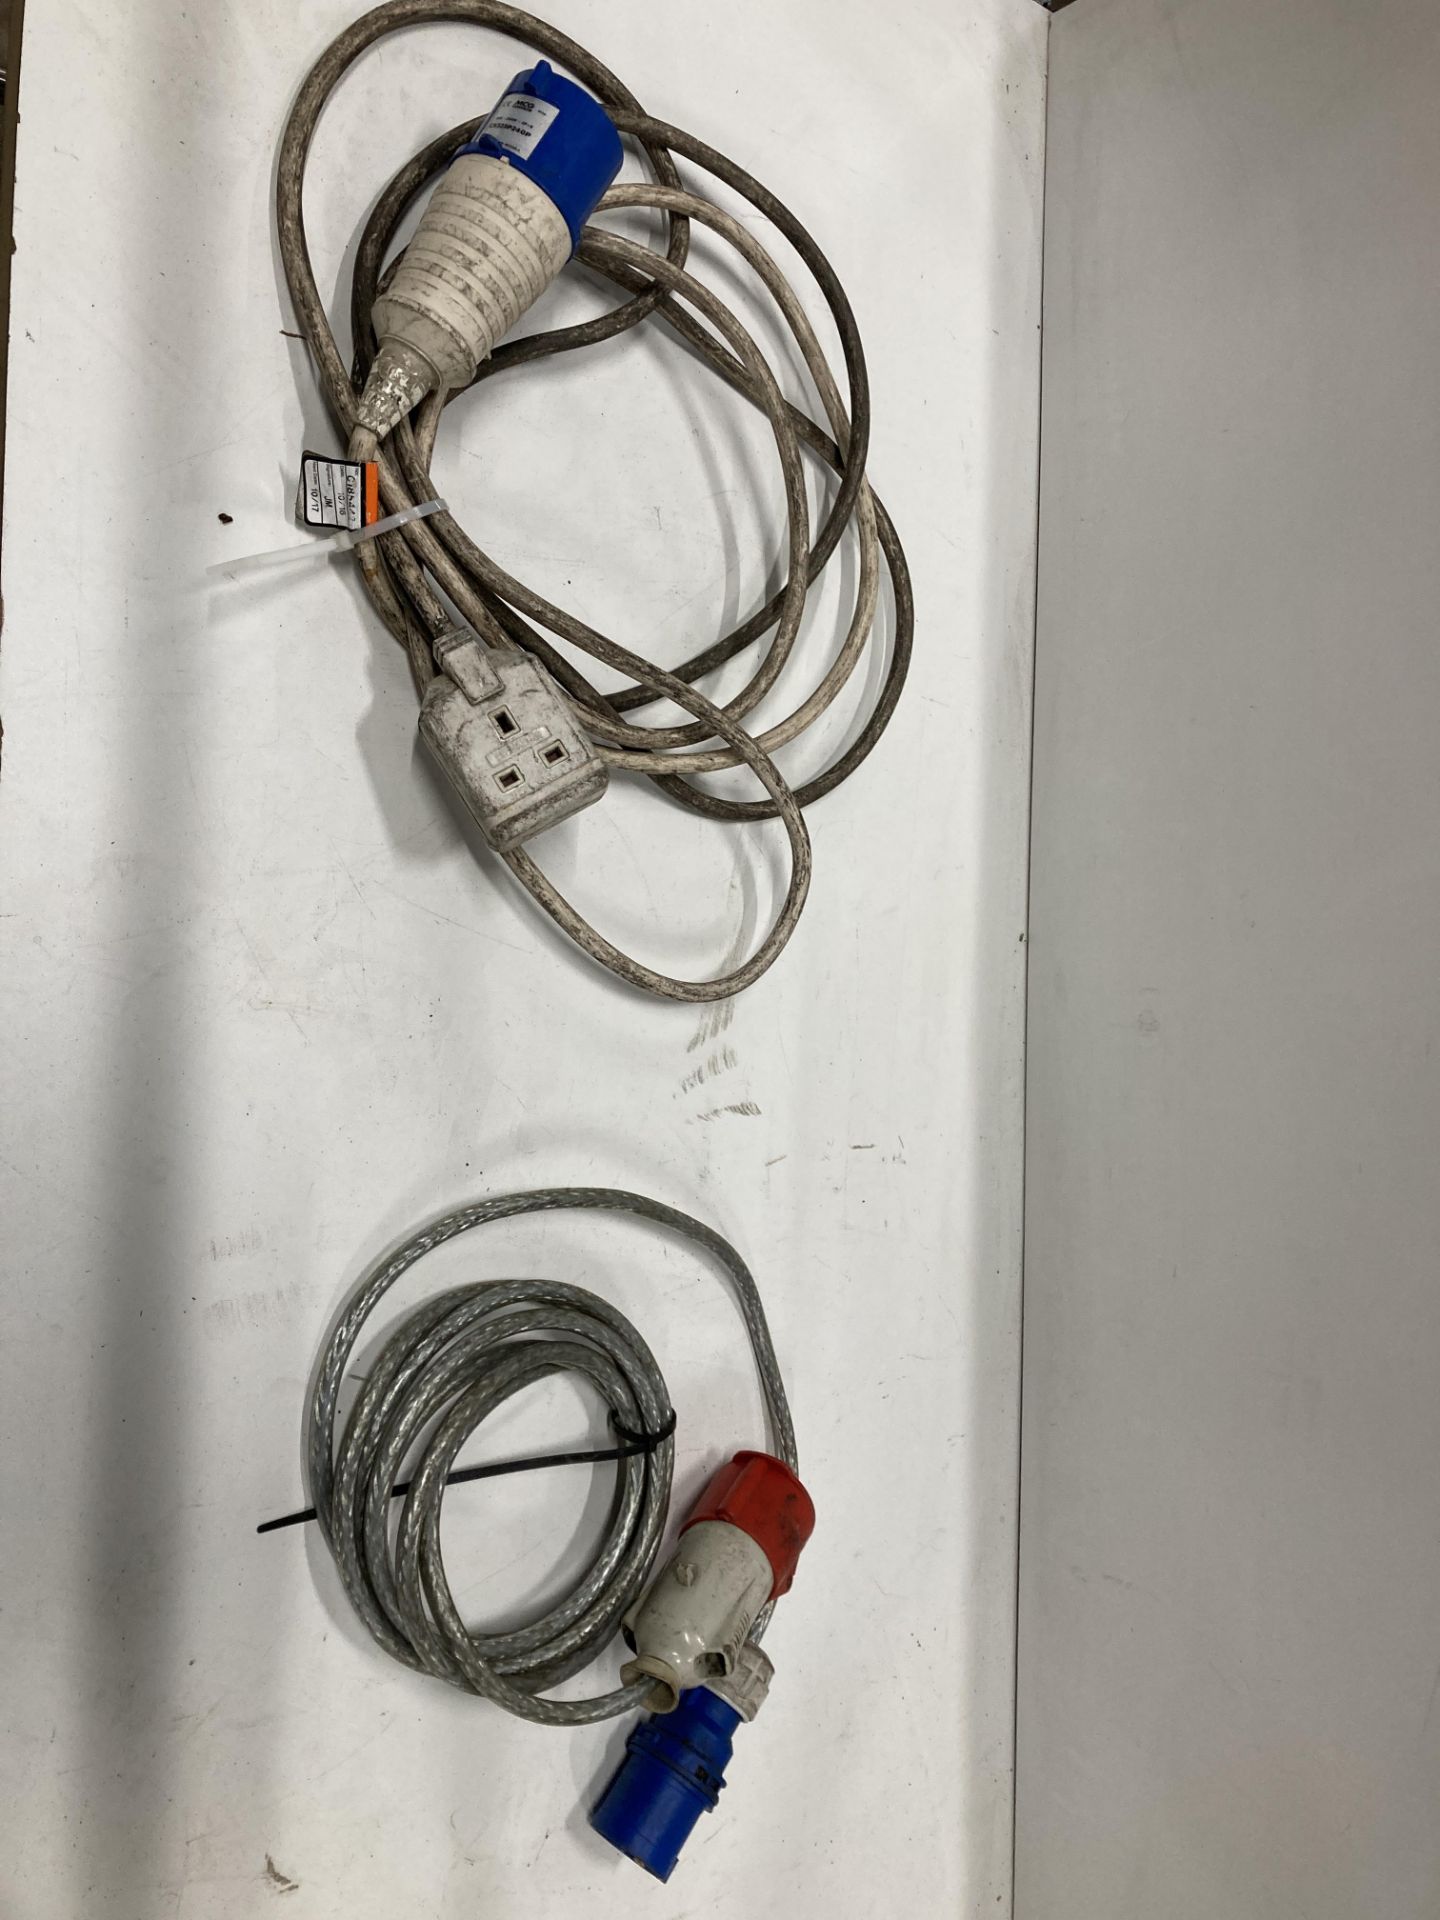 4 x Various 240v Extension/Adaptor Cables - As Pictured - Image 7 of 10